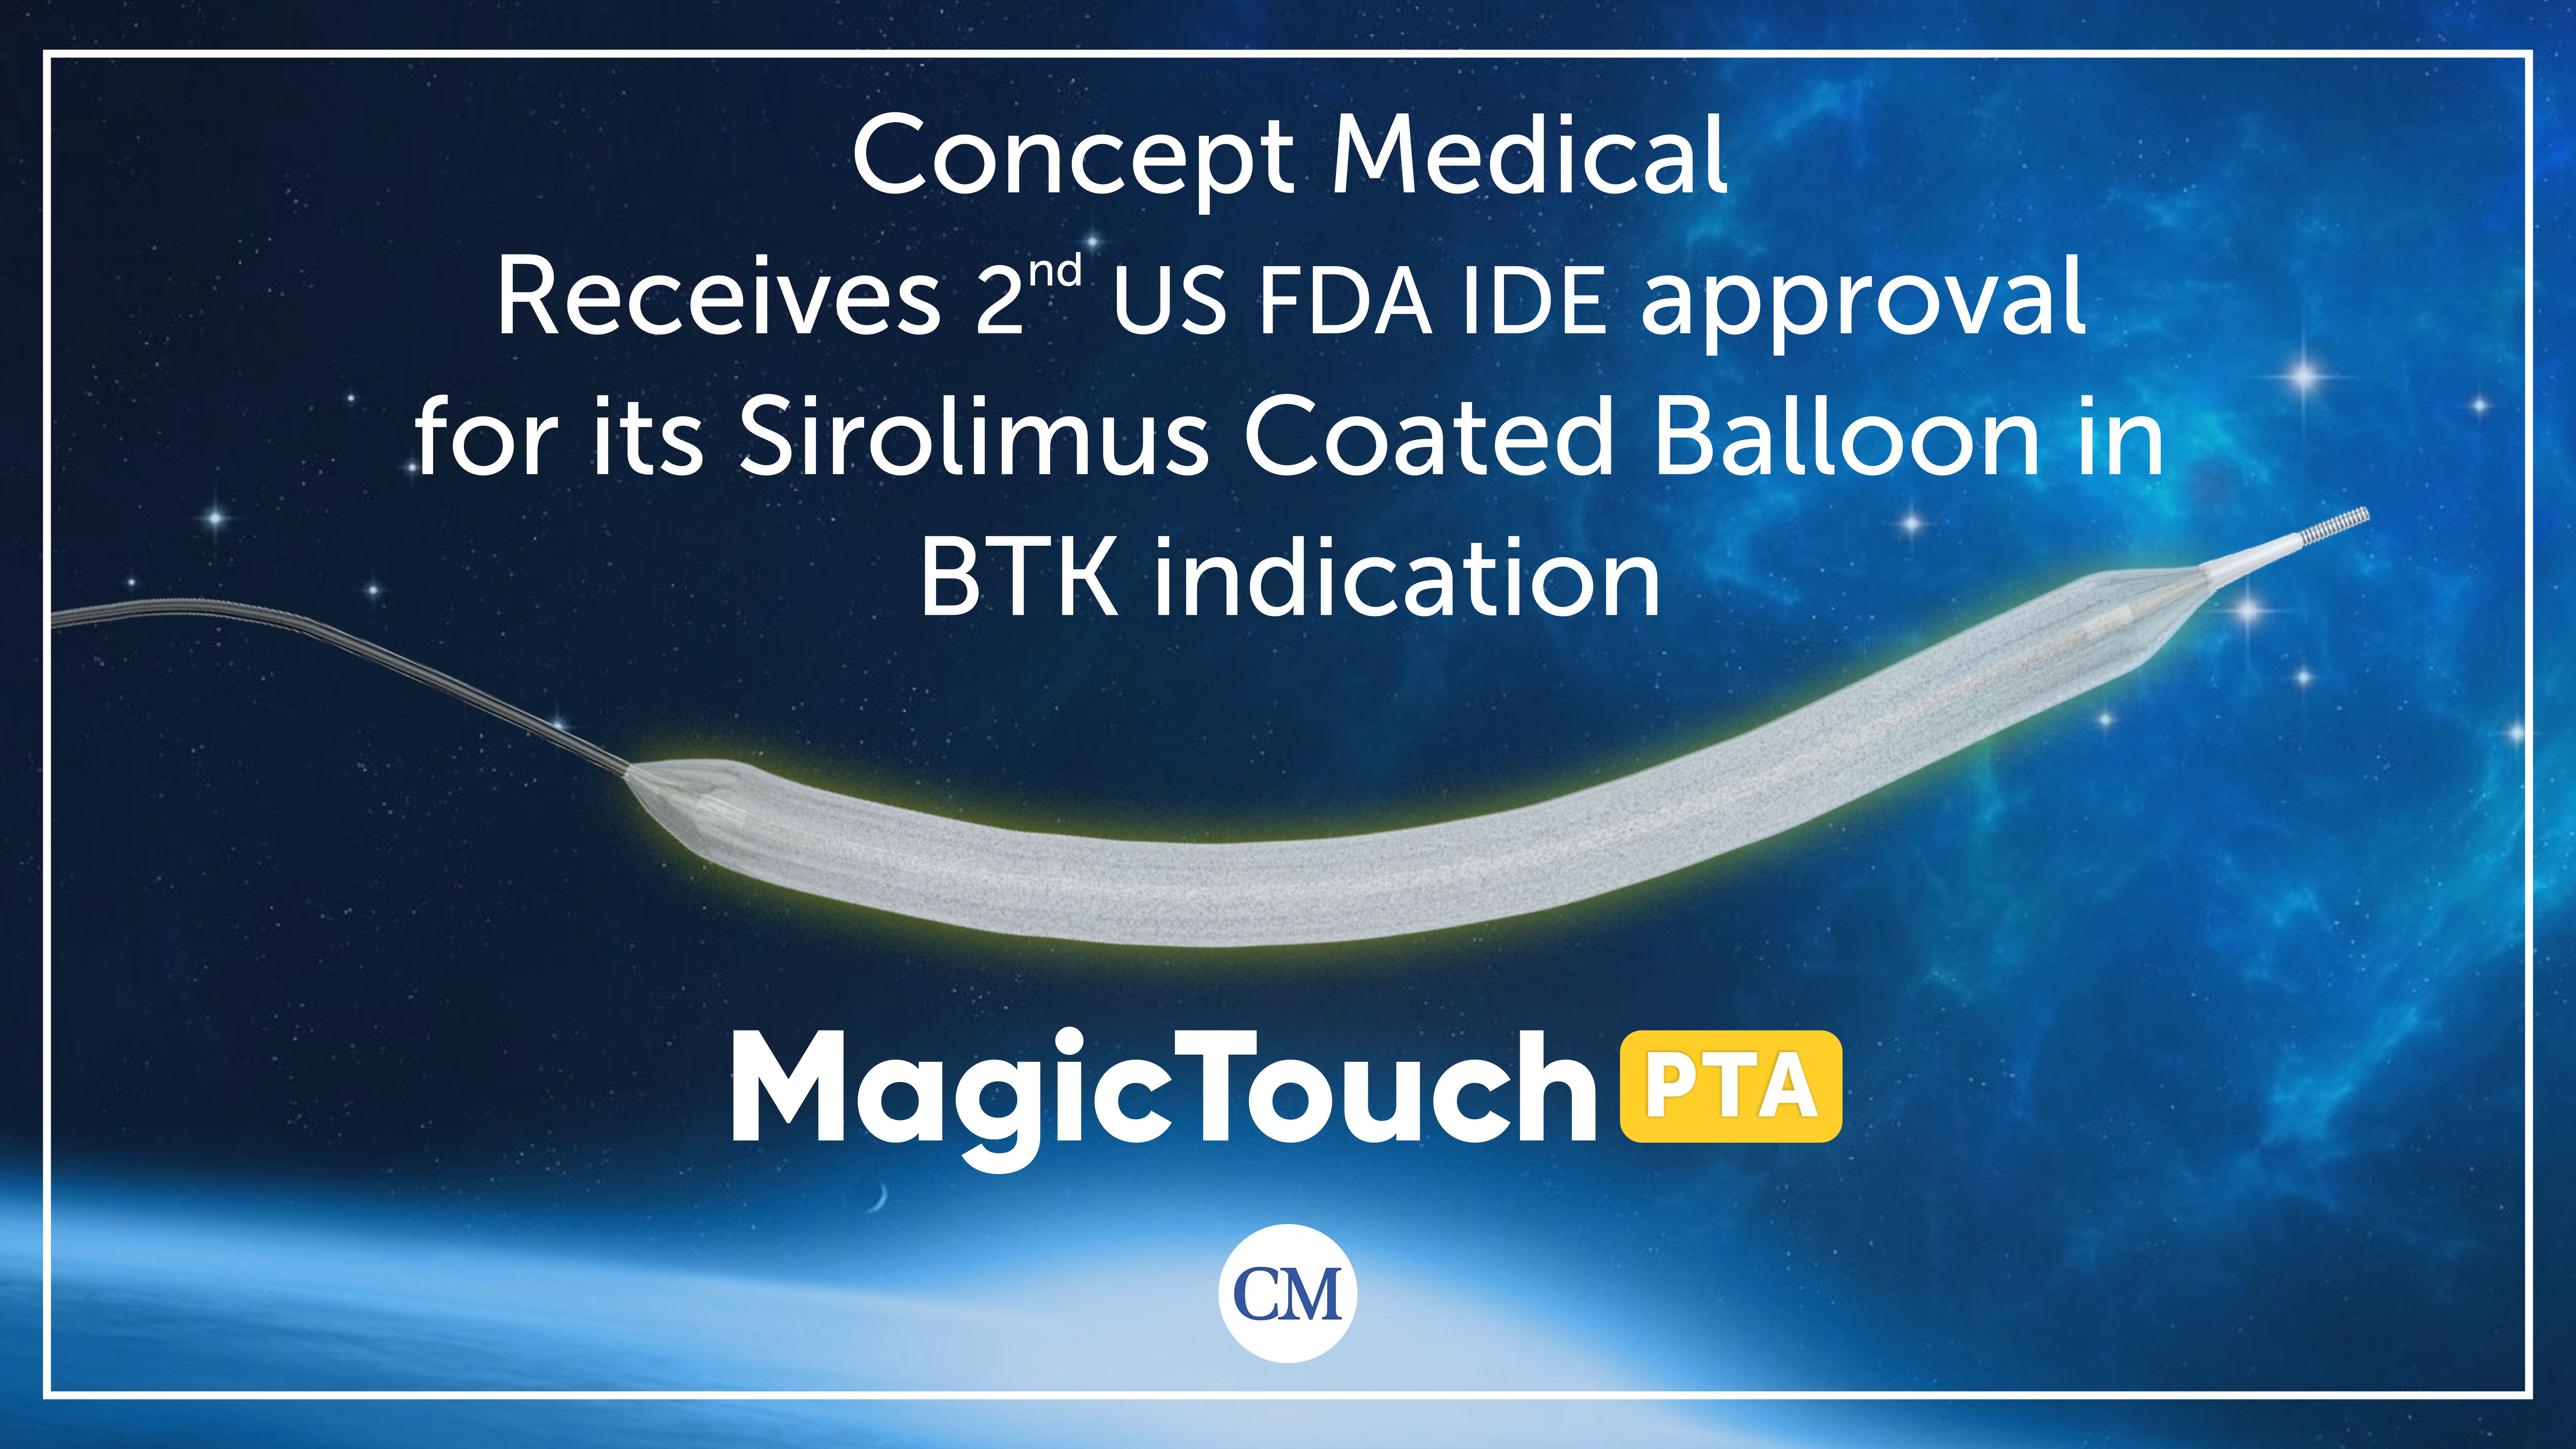 Concept Medical granted Investigational Device Exemption (IDE) approval for their Magic Touch Sirolimus Coated Balloon for the treatment of Below the Knee (BTK) Arterial Disease